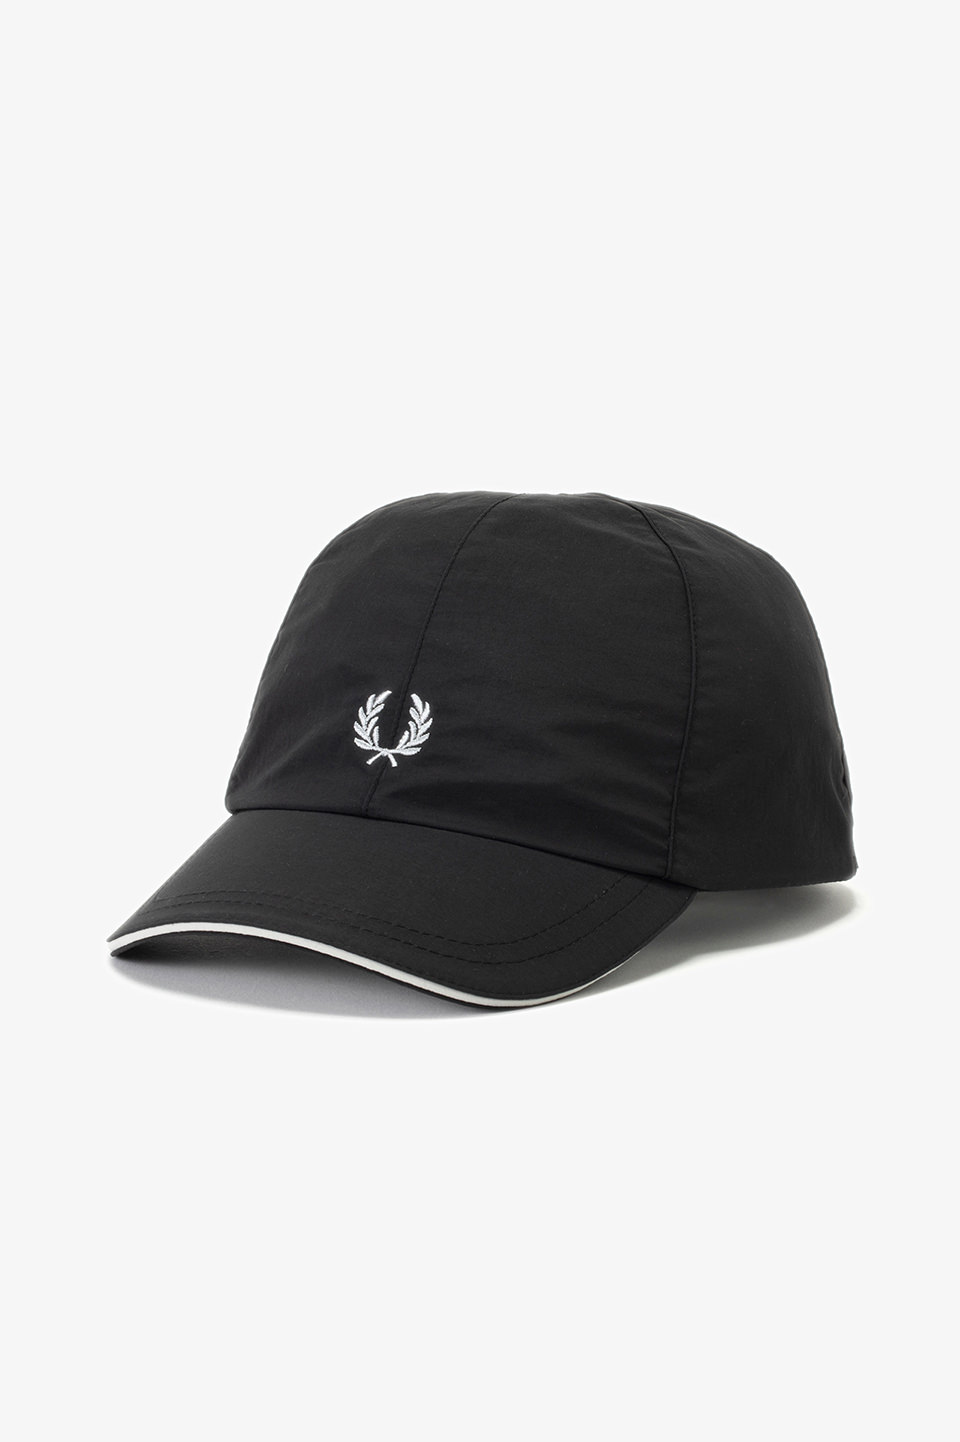 Piped Dual Branded Cap(1SZ 529：BLACK / LIMESTONE): | FRED PERRY 